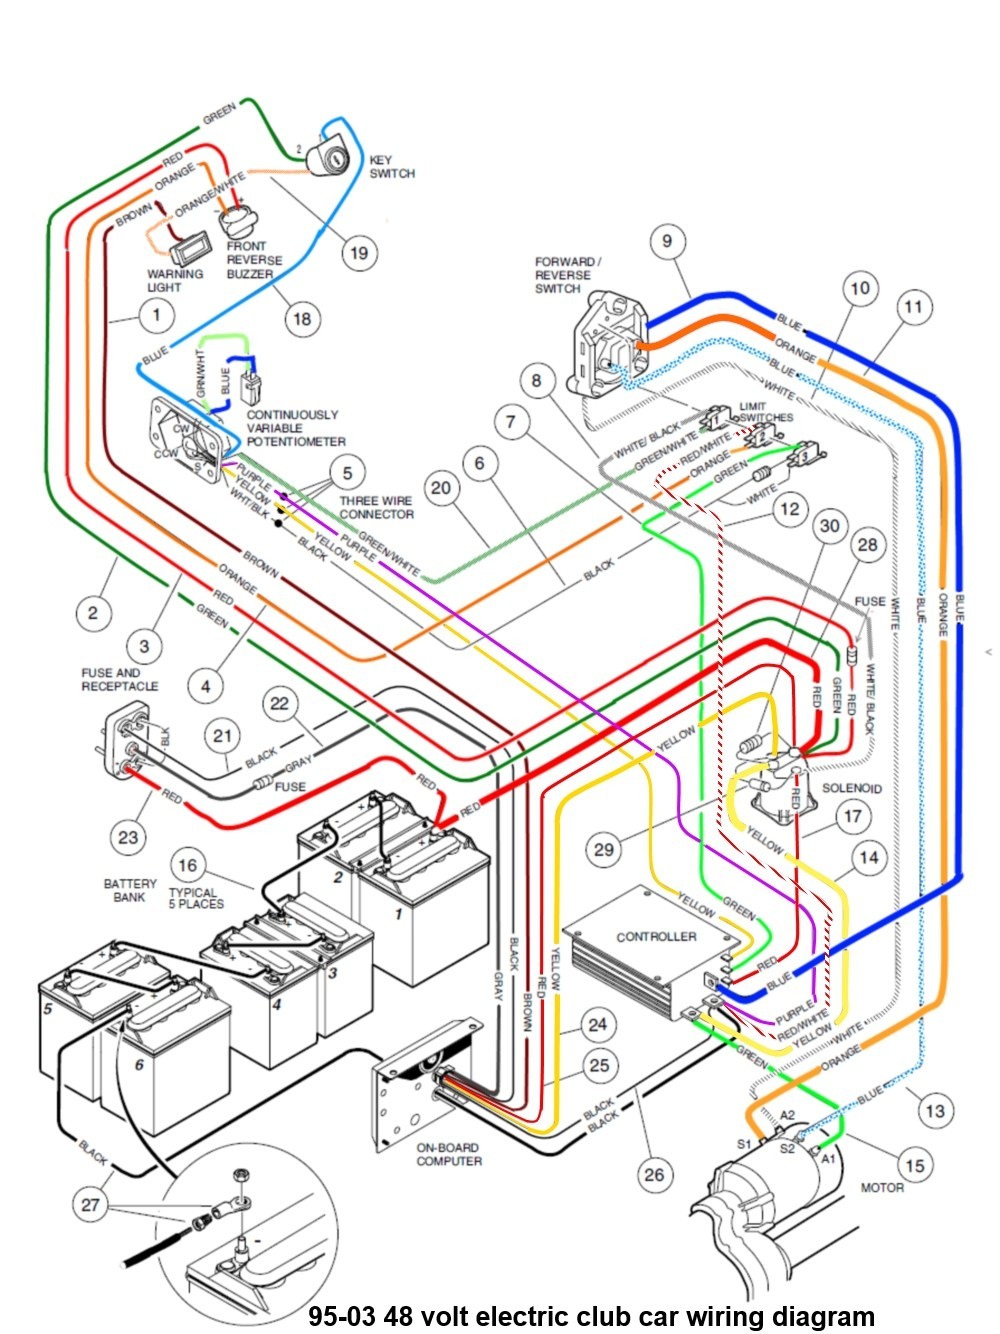 Ingersoll Rand Club Car Wiring Diagram And For 1999 Pertaining To Golf Cart Parts